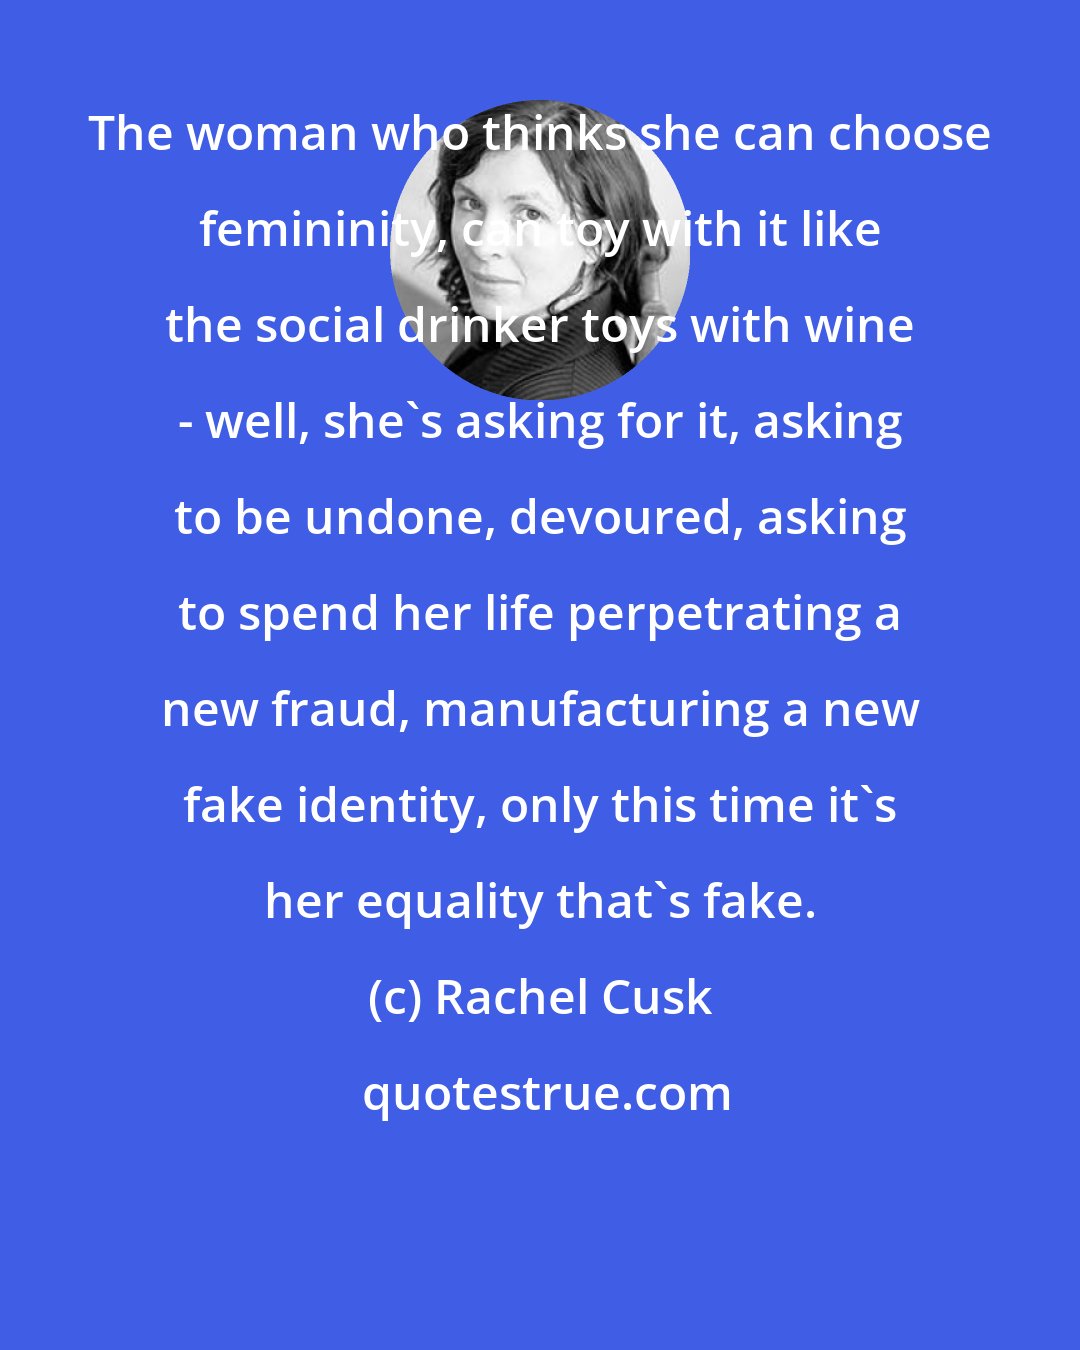 Rachel Cusk: The woman who thinks she can choose femininity, can toy with it like the social drinker toys with wine - well, she's asking for it, asking to be undone, devoured, asking to spend her life perpetrating a new fraud, manufacturing a new fake identity, only this time it's her equality that's fake.